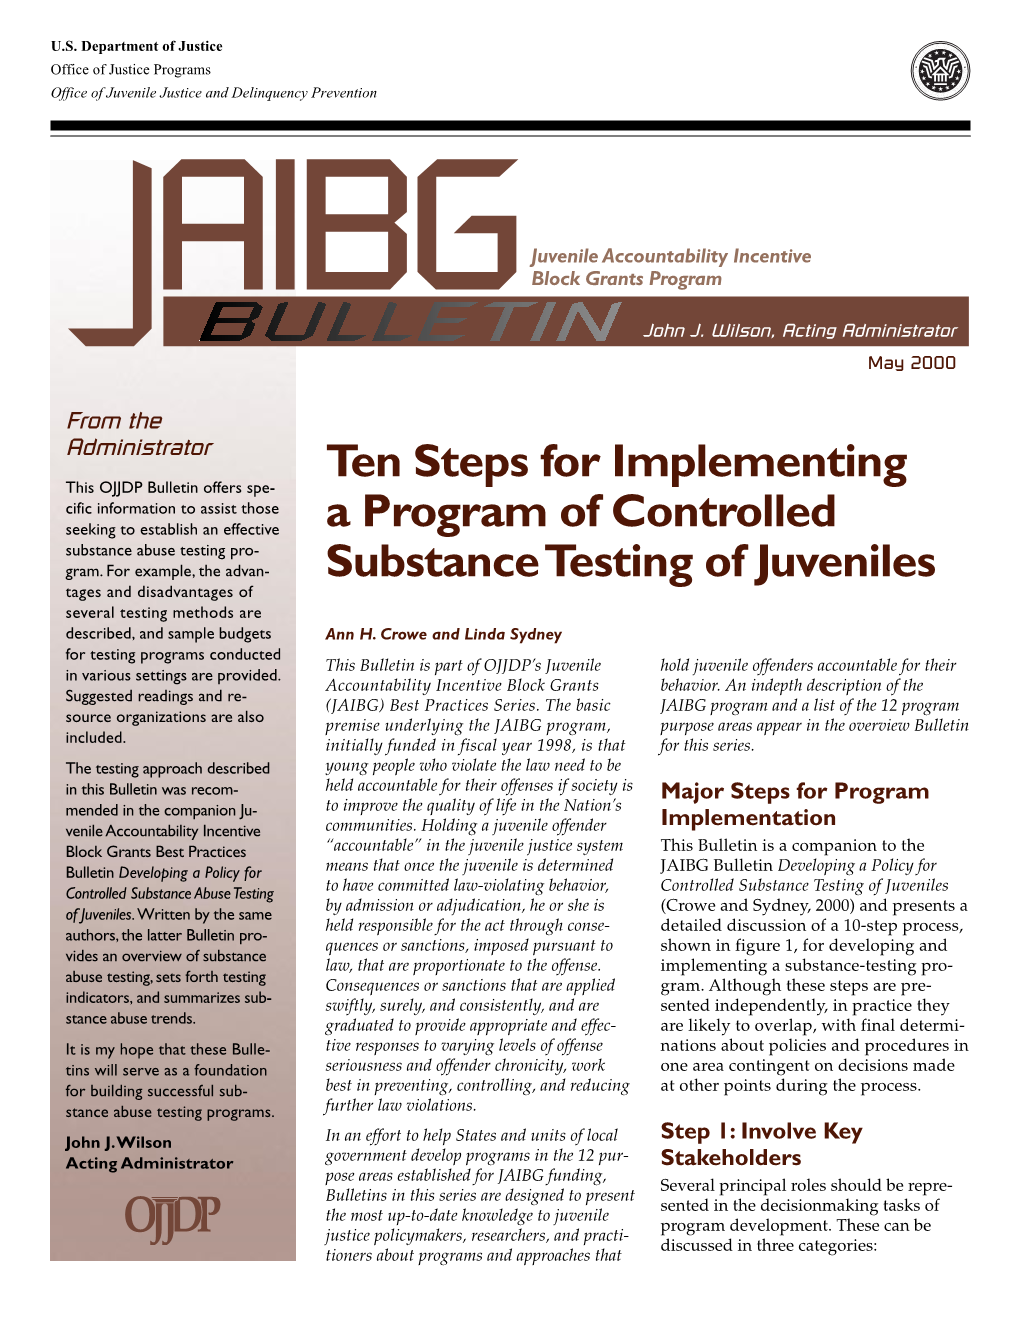 Ten Steps for Implementing a Program of Controlled Substance Testing In